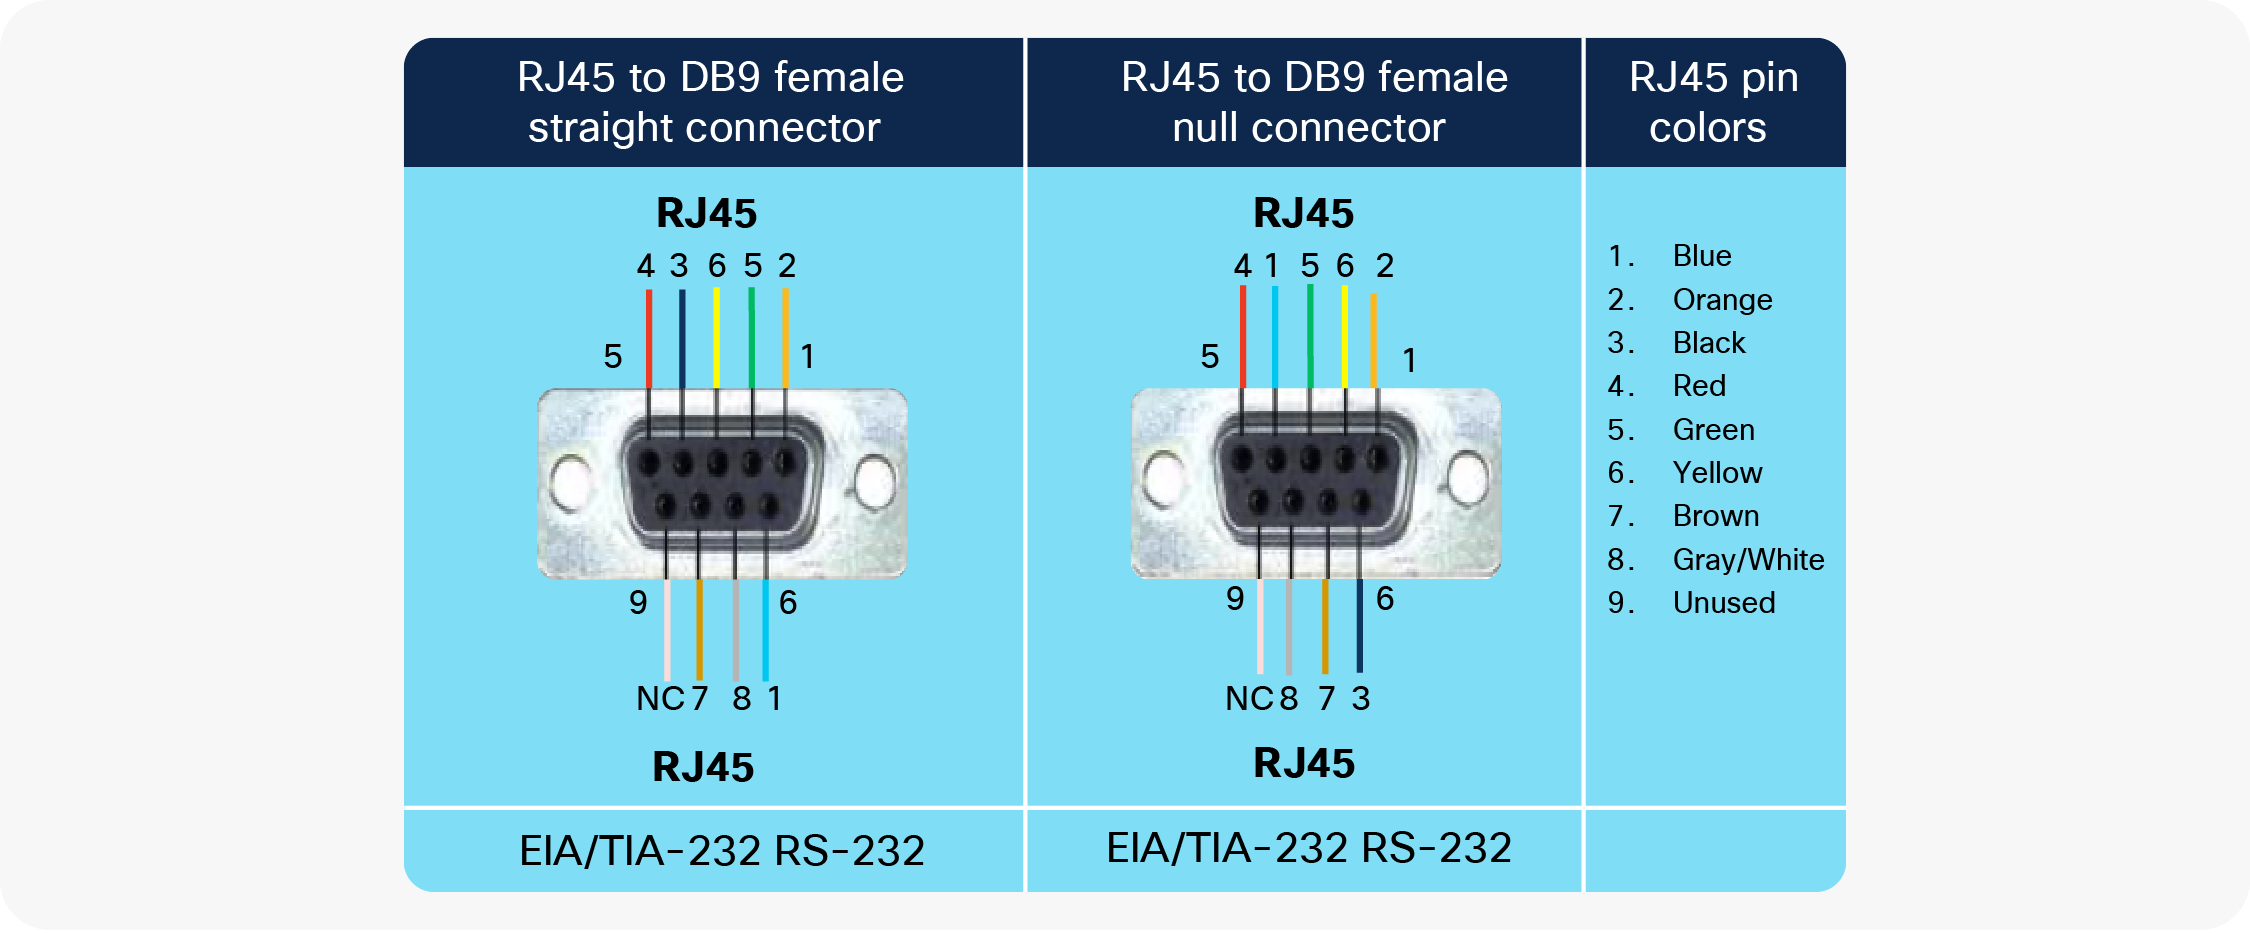 Pinouts for RJ45 to DB9 female adapters